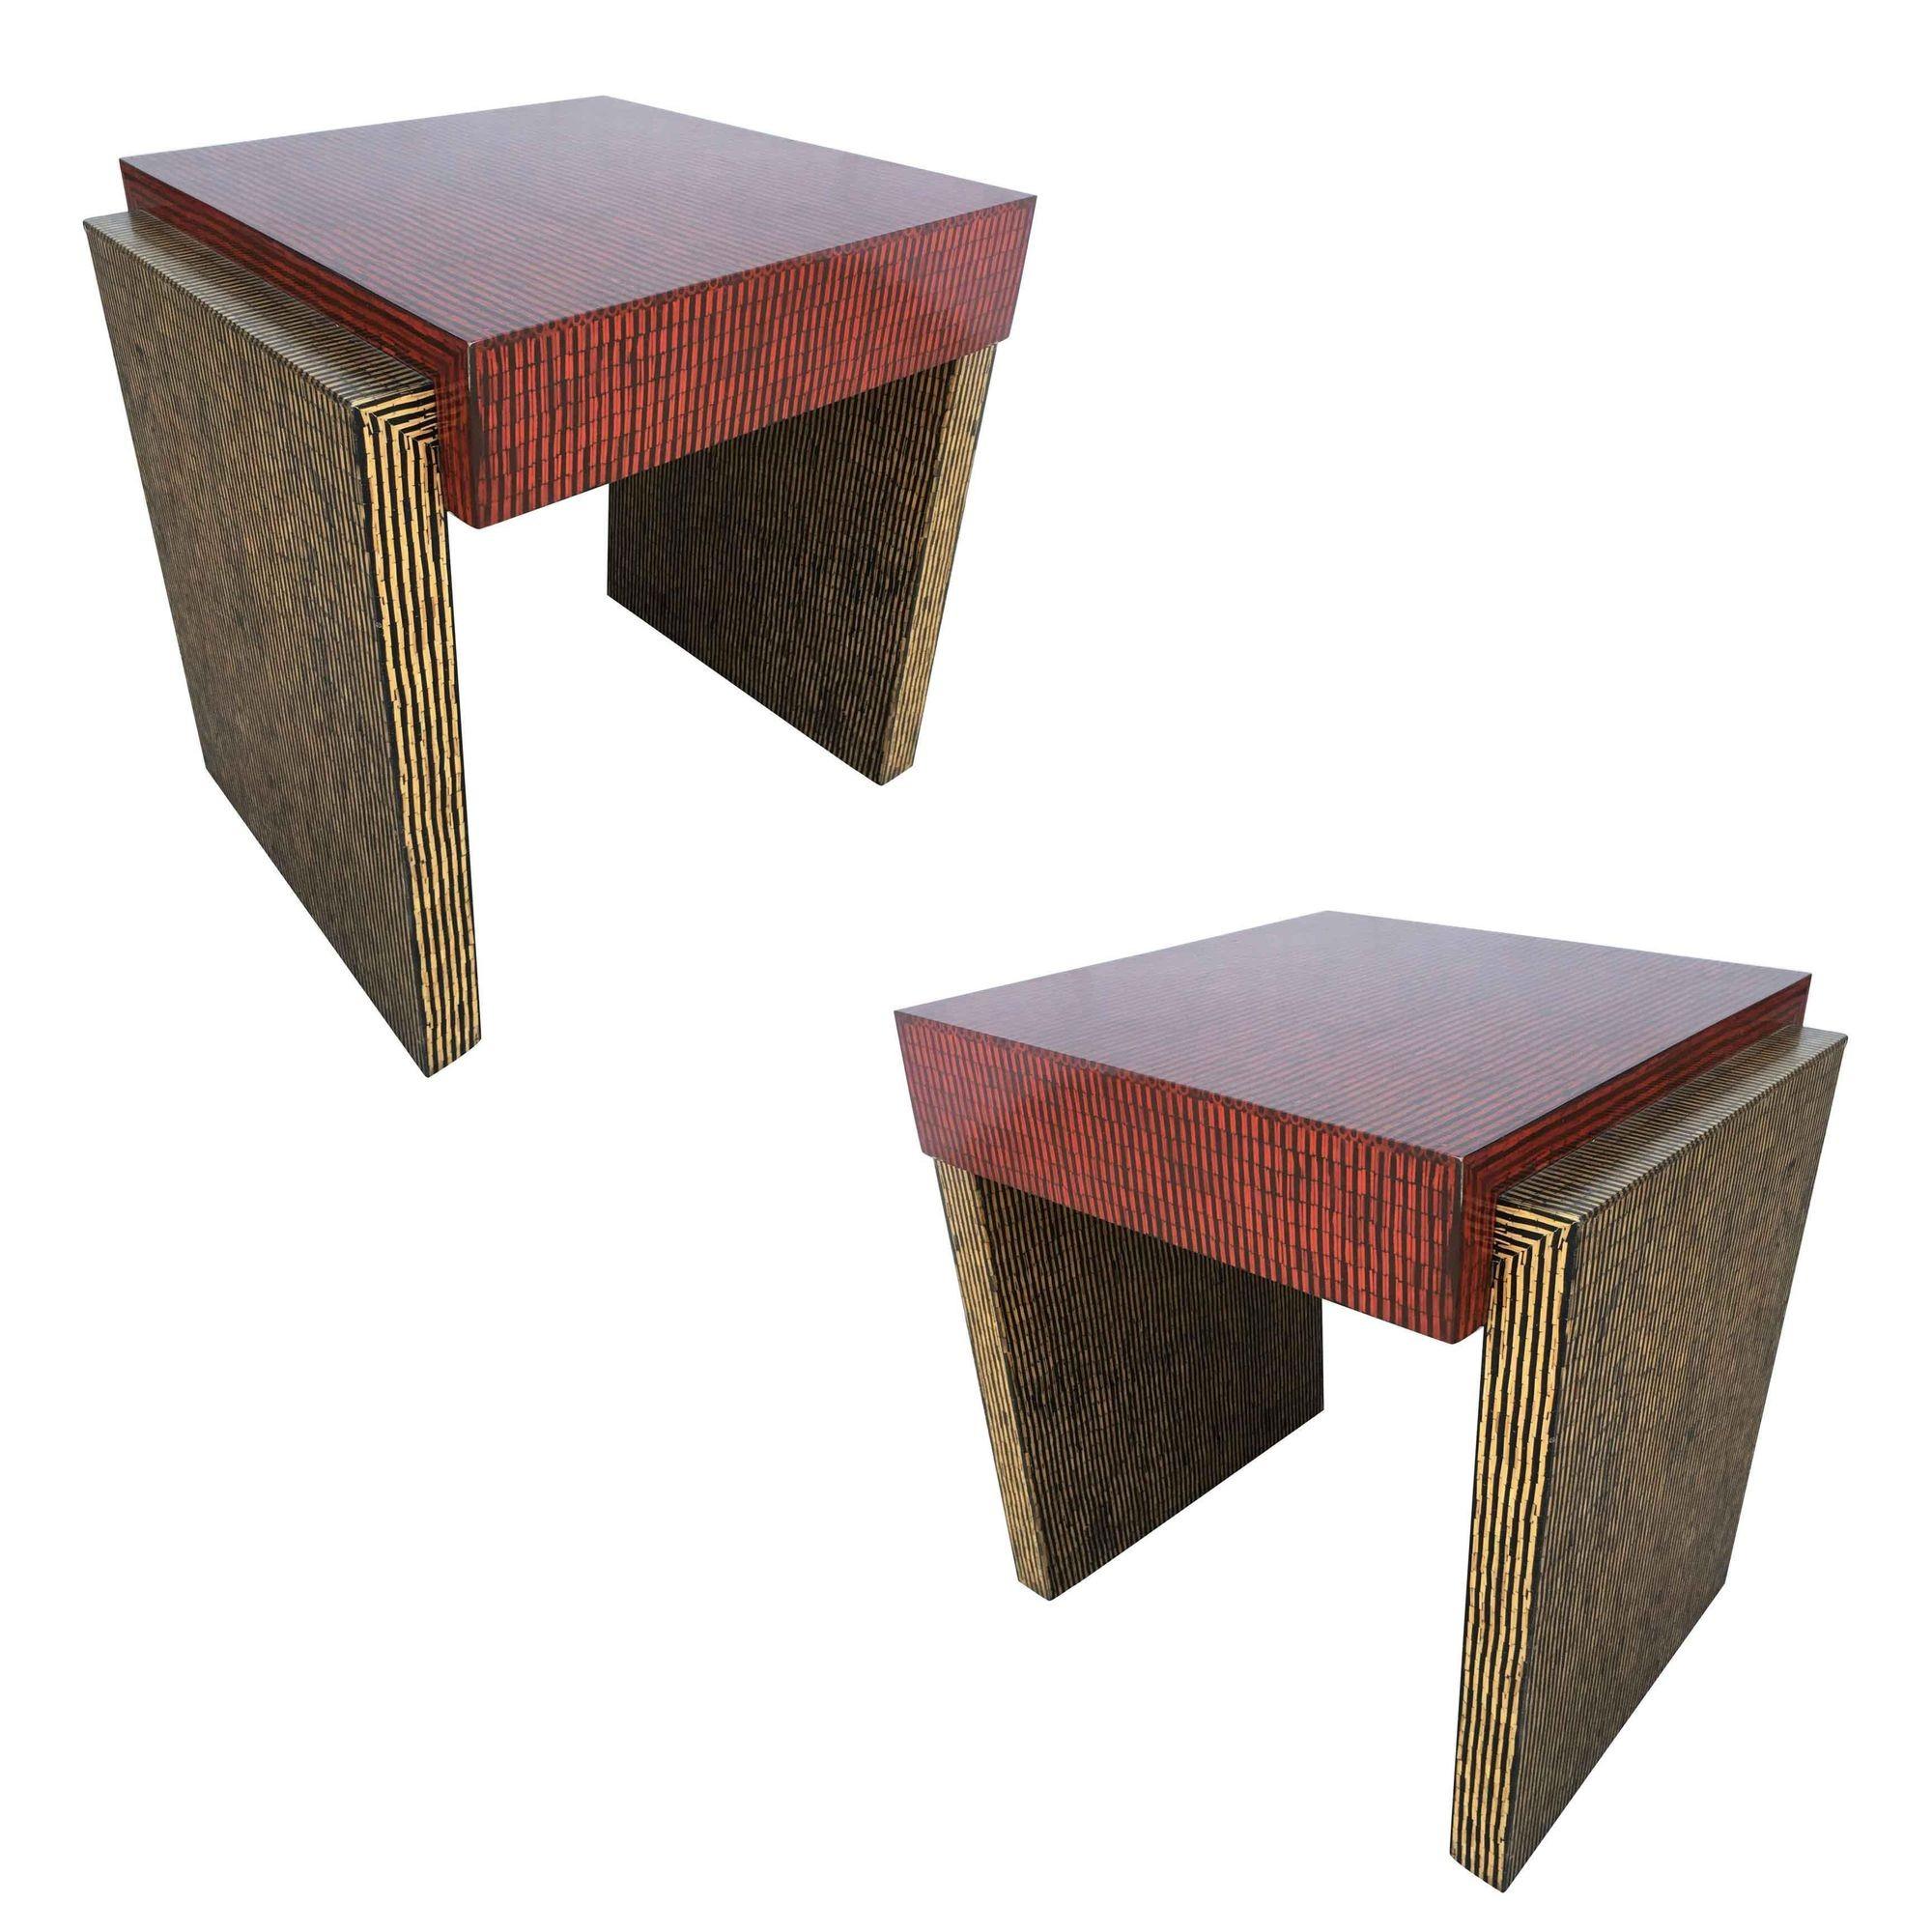 Two-Tone Cubist Style Side Table and Coffee Table Set, Set of 3 In Excellent Condition For Sale In Van Nuys, CA